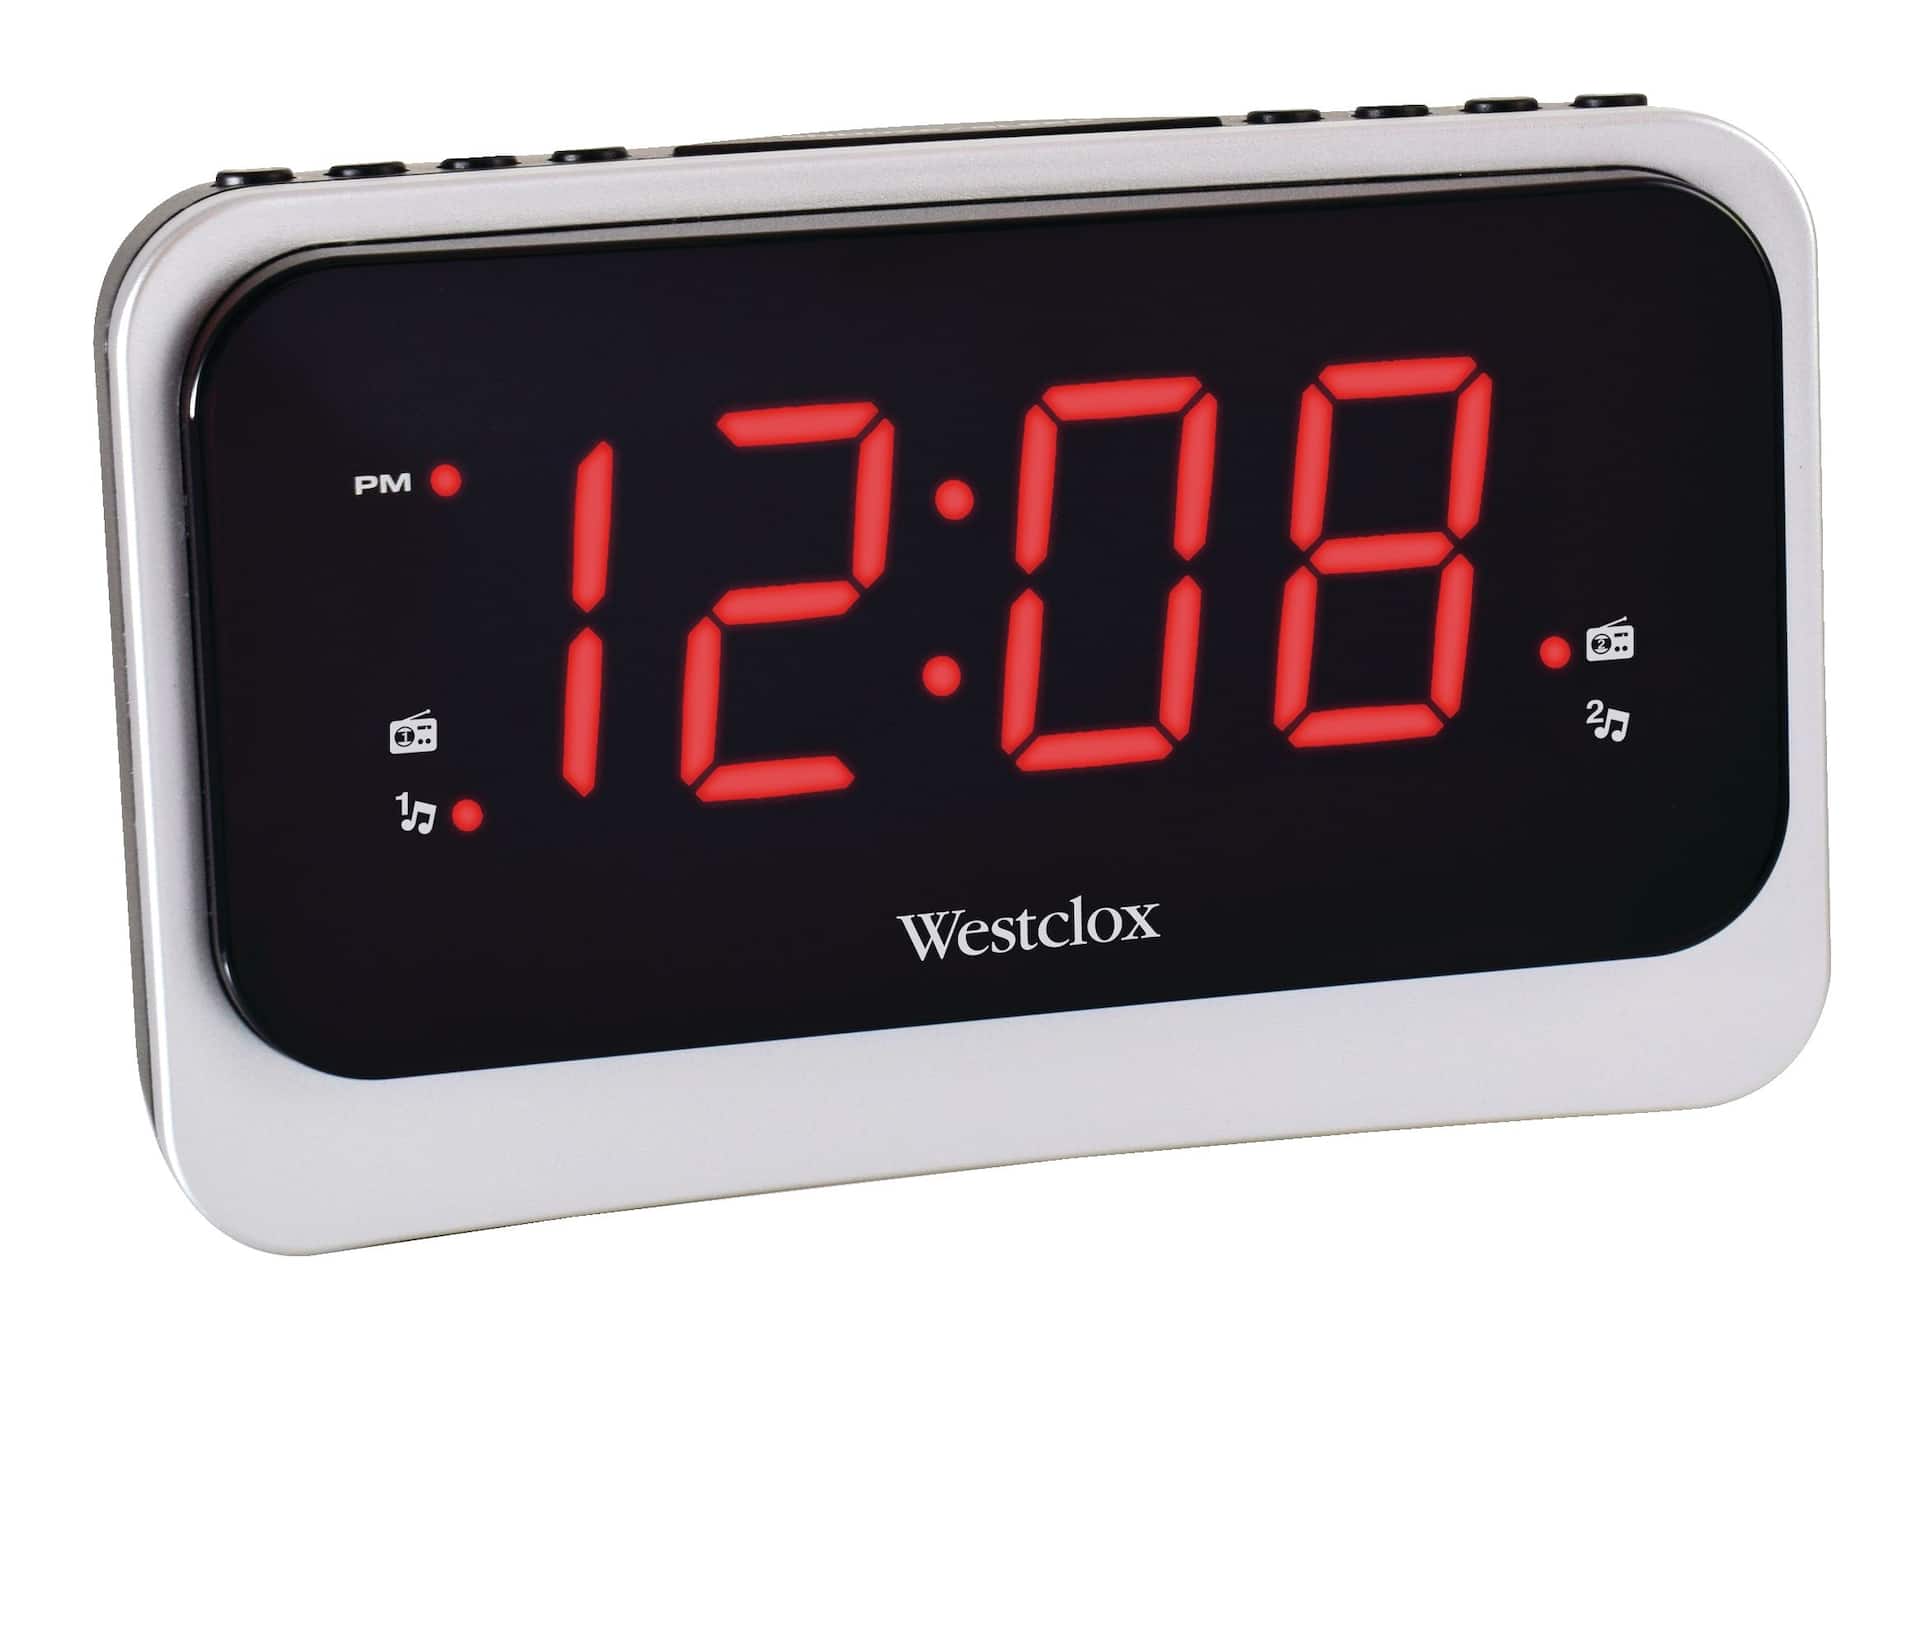 https://media-www.canadiantire.ca/product/living/electronics/home-communications/0441299/westclox-nature-sounds-clock-radio-with-usb-charging-ca9a26aa-4c81-46f8-b249-56dd5848b263-jpgrendition.jpg